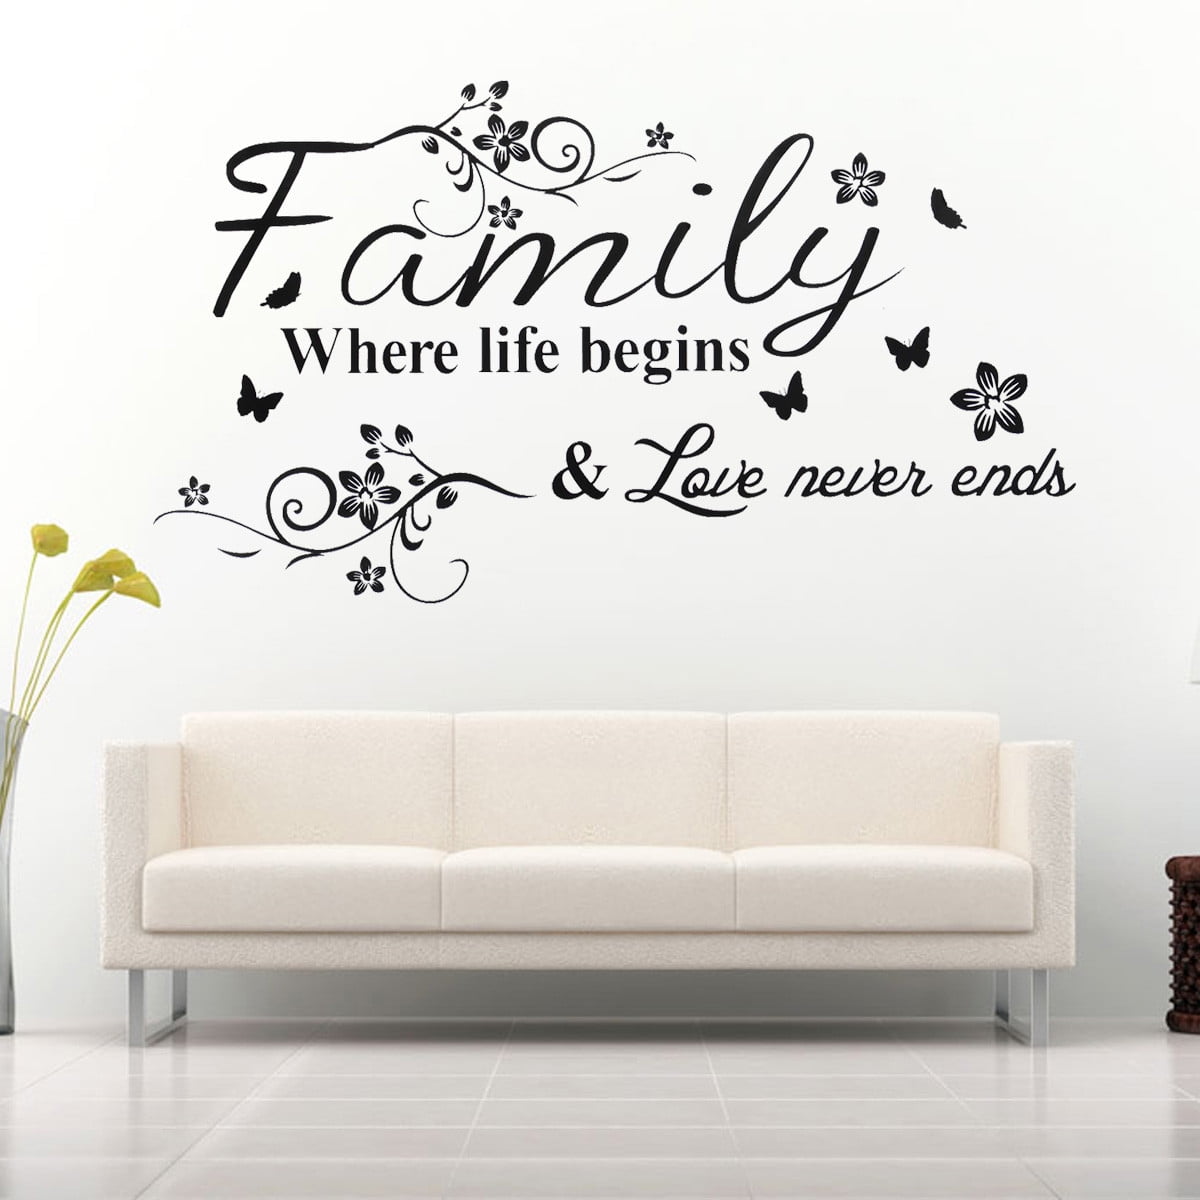 Football English Words Home Room Decor Removable Wall Stickers Decal Decorations